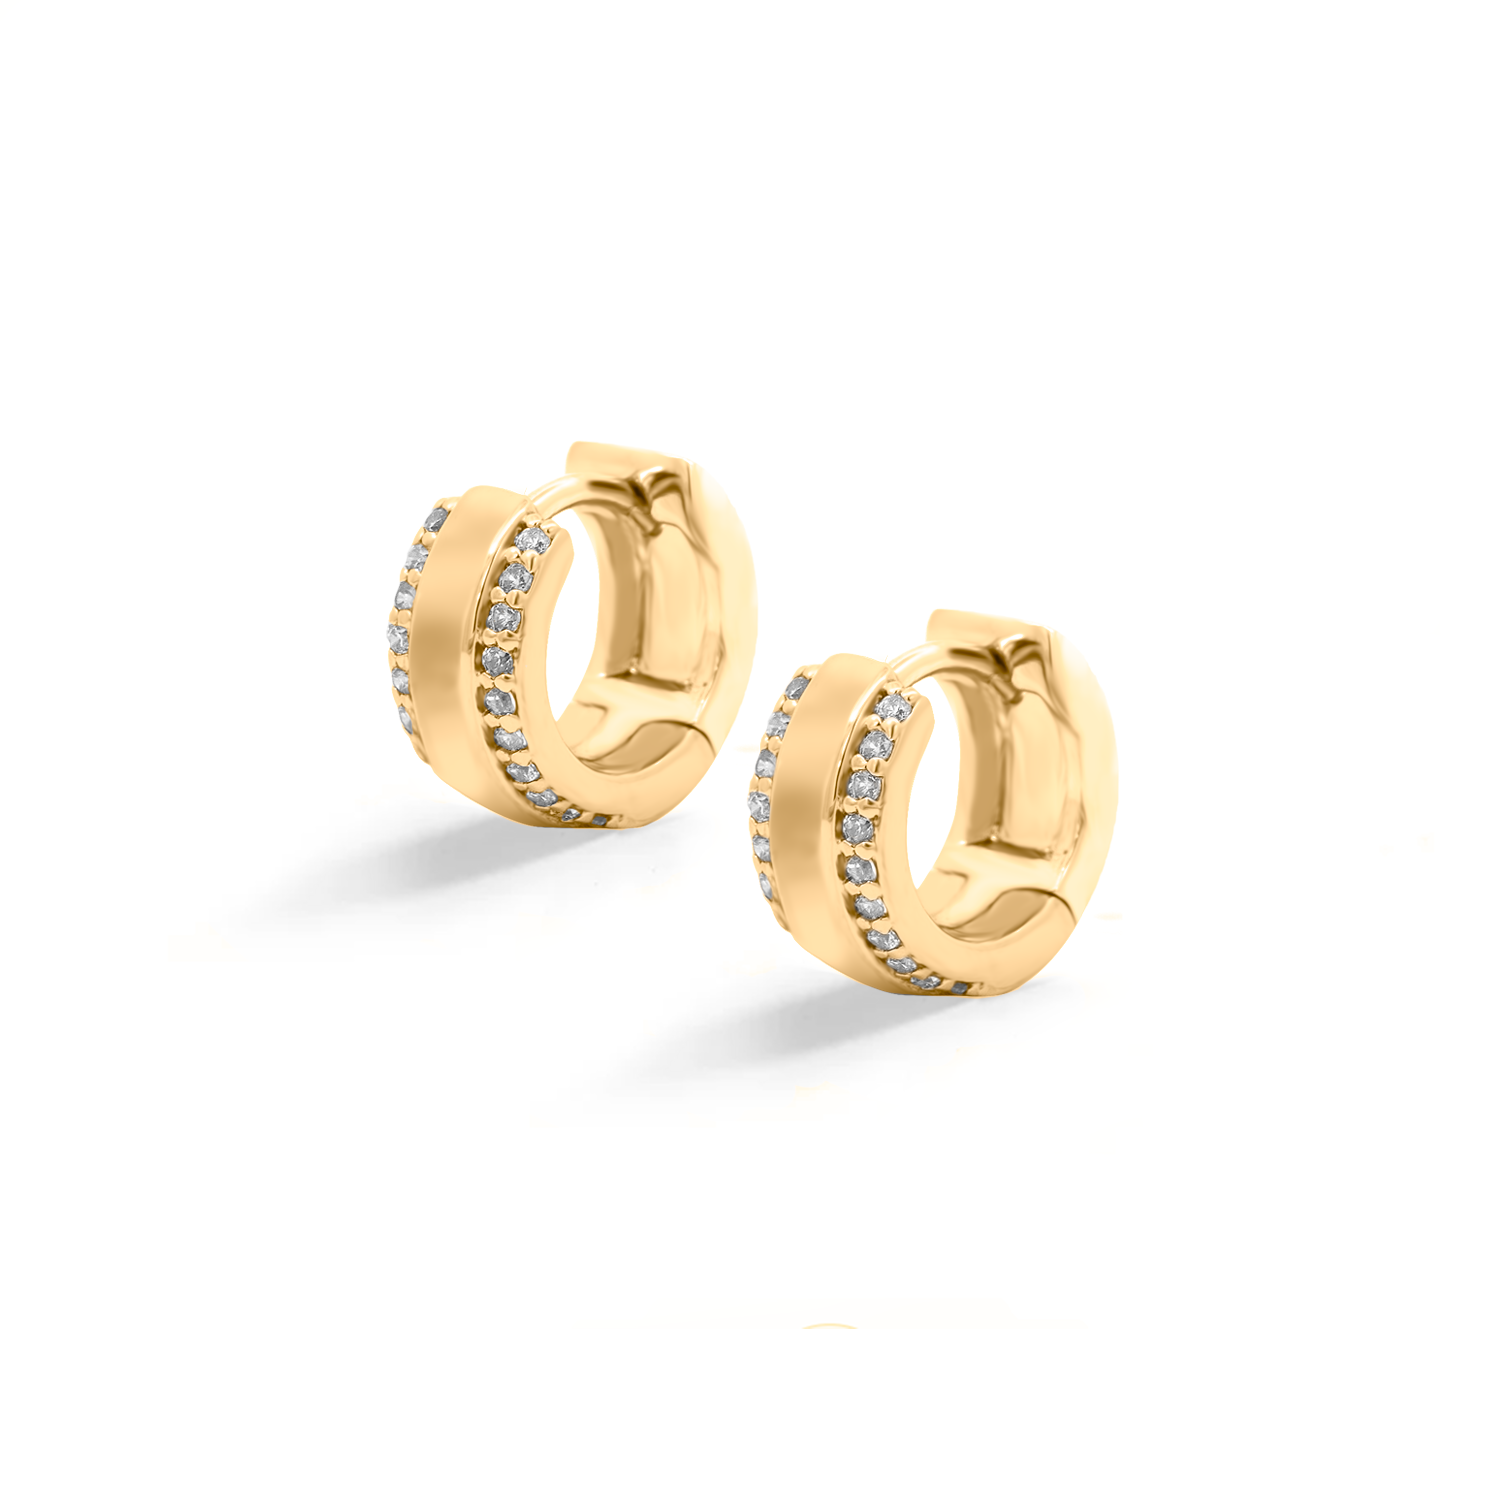 Classic and elegant huggies in gold with cubic zirconia.